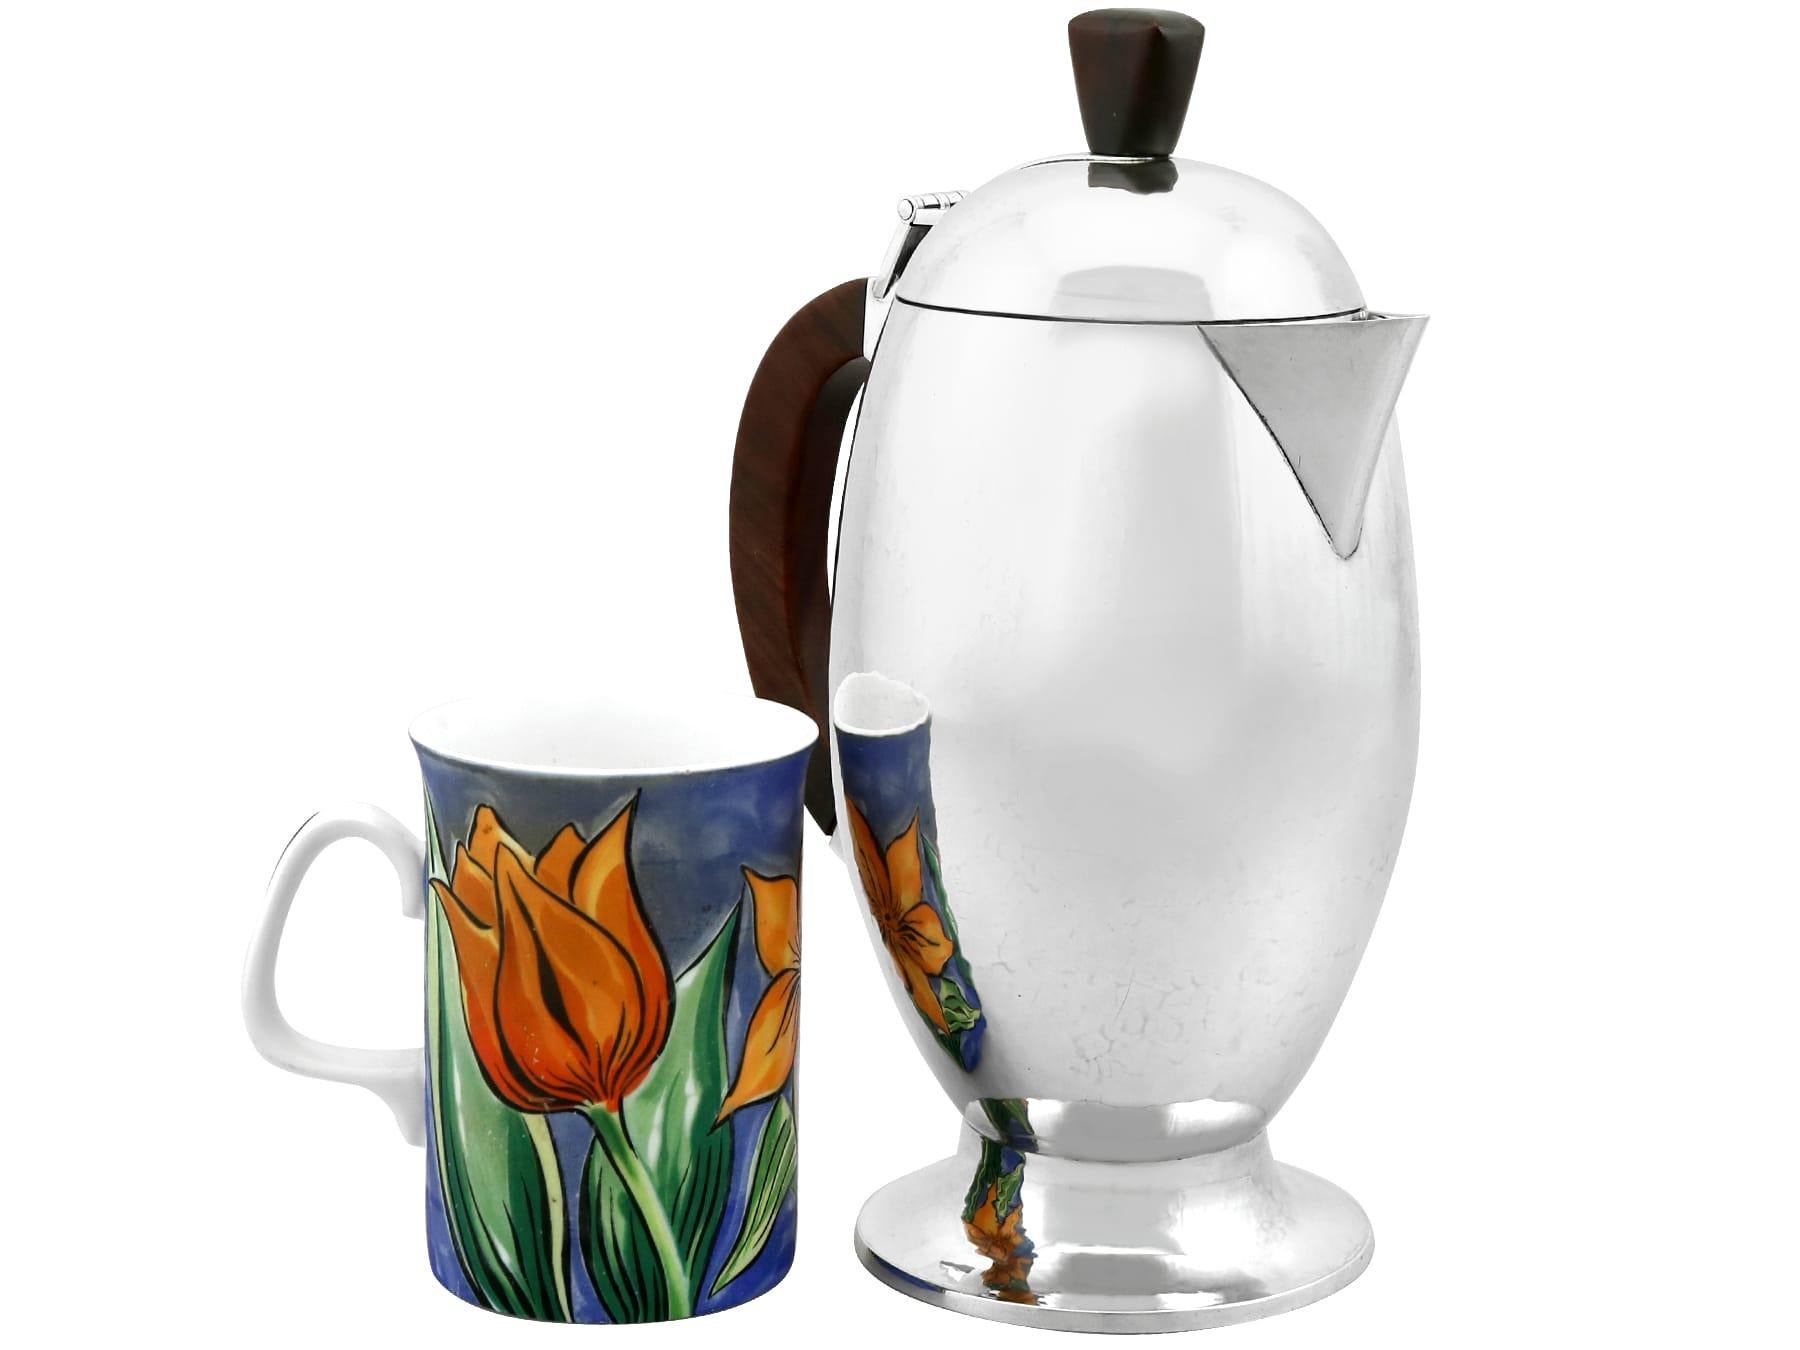 An exceptional, fine and impressive vintage Elizabeth II English sterling silver coffee jug in the Design style; an addition to our silver teaware collection

This exceptional, fine and impressive vintage sterling silver coffee jug has a plain